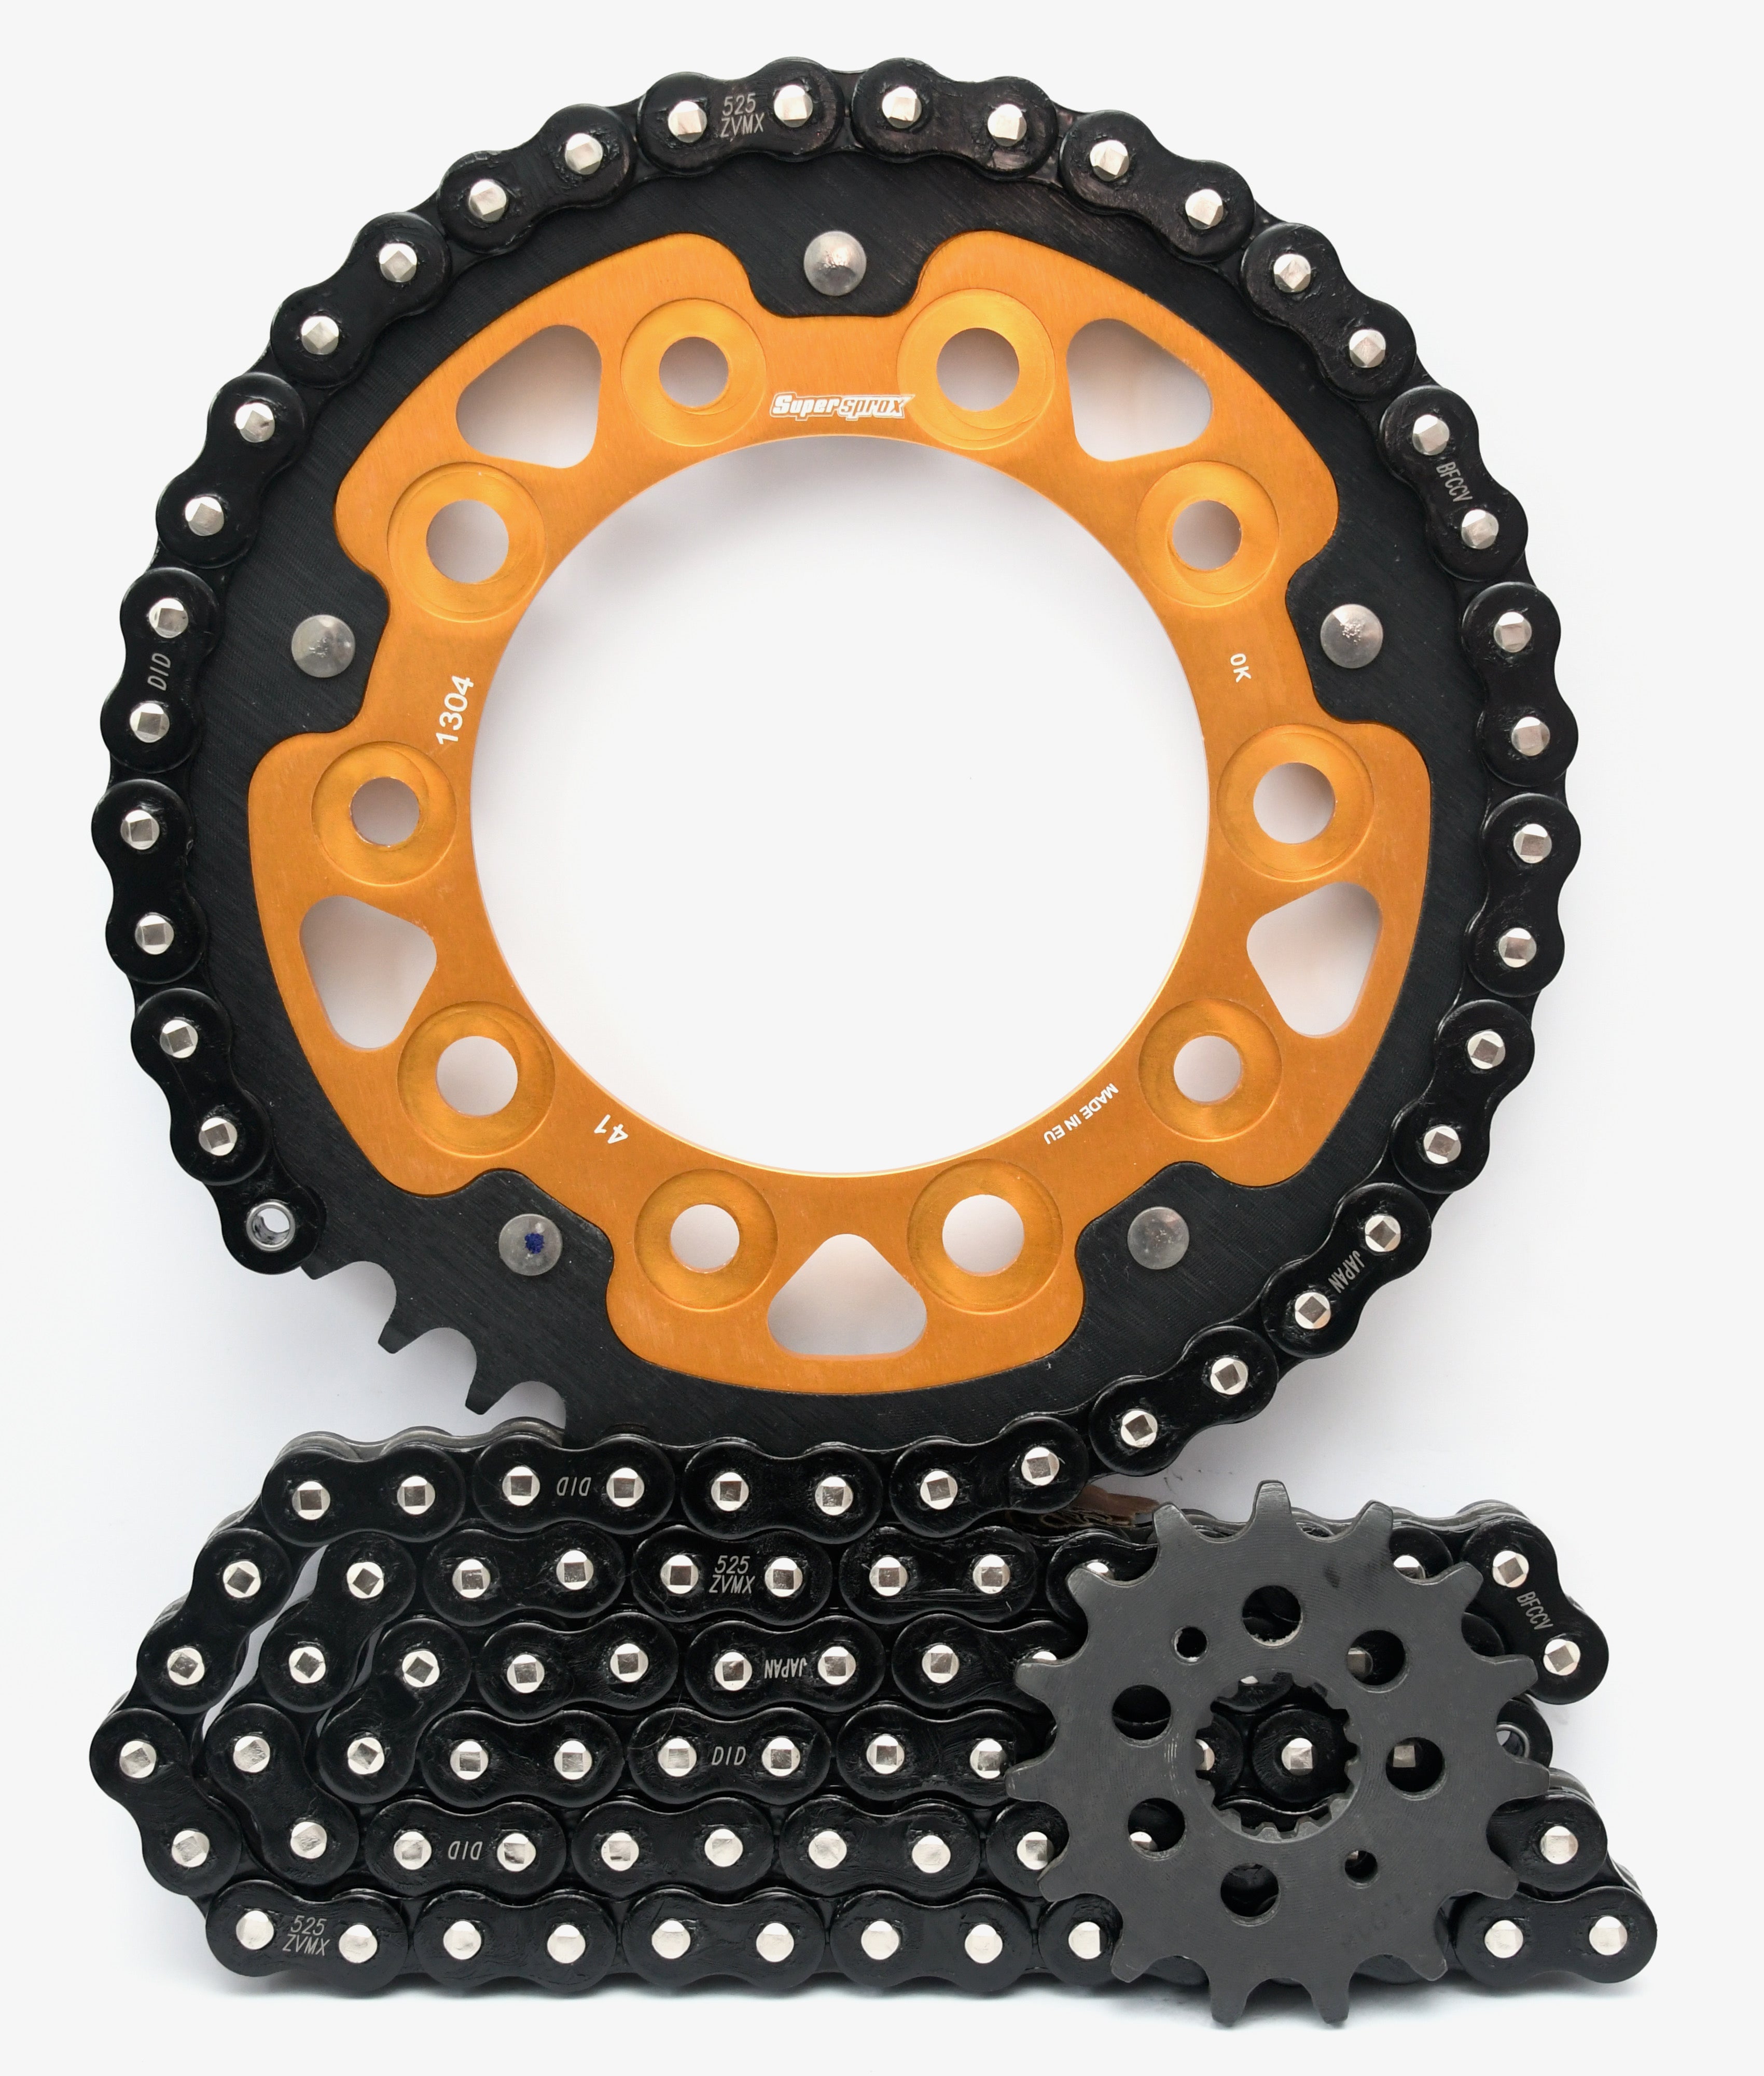 Supersprox Chain & Sprocket Kit for Yamaha YZF R1 2015> - Standard Gearing - 0